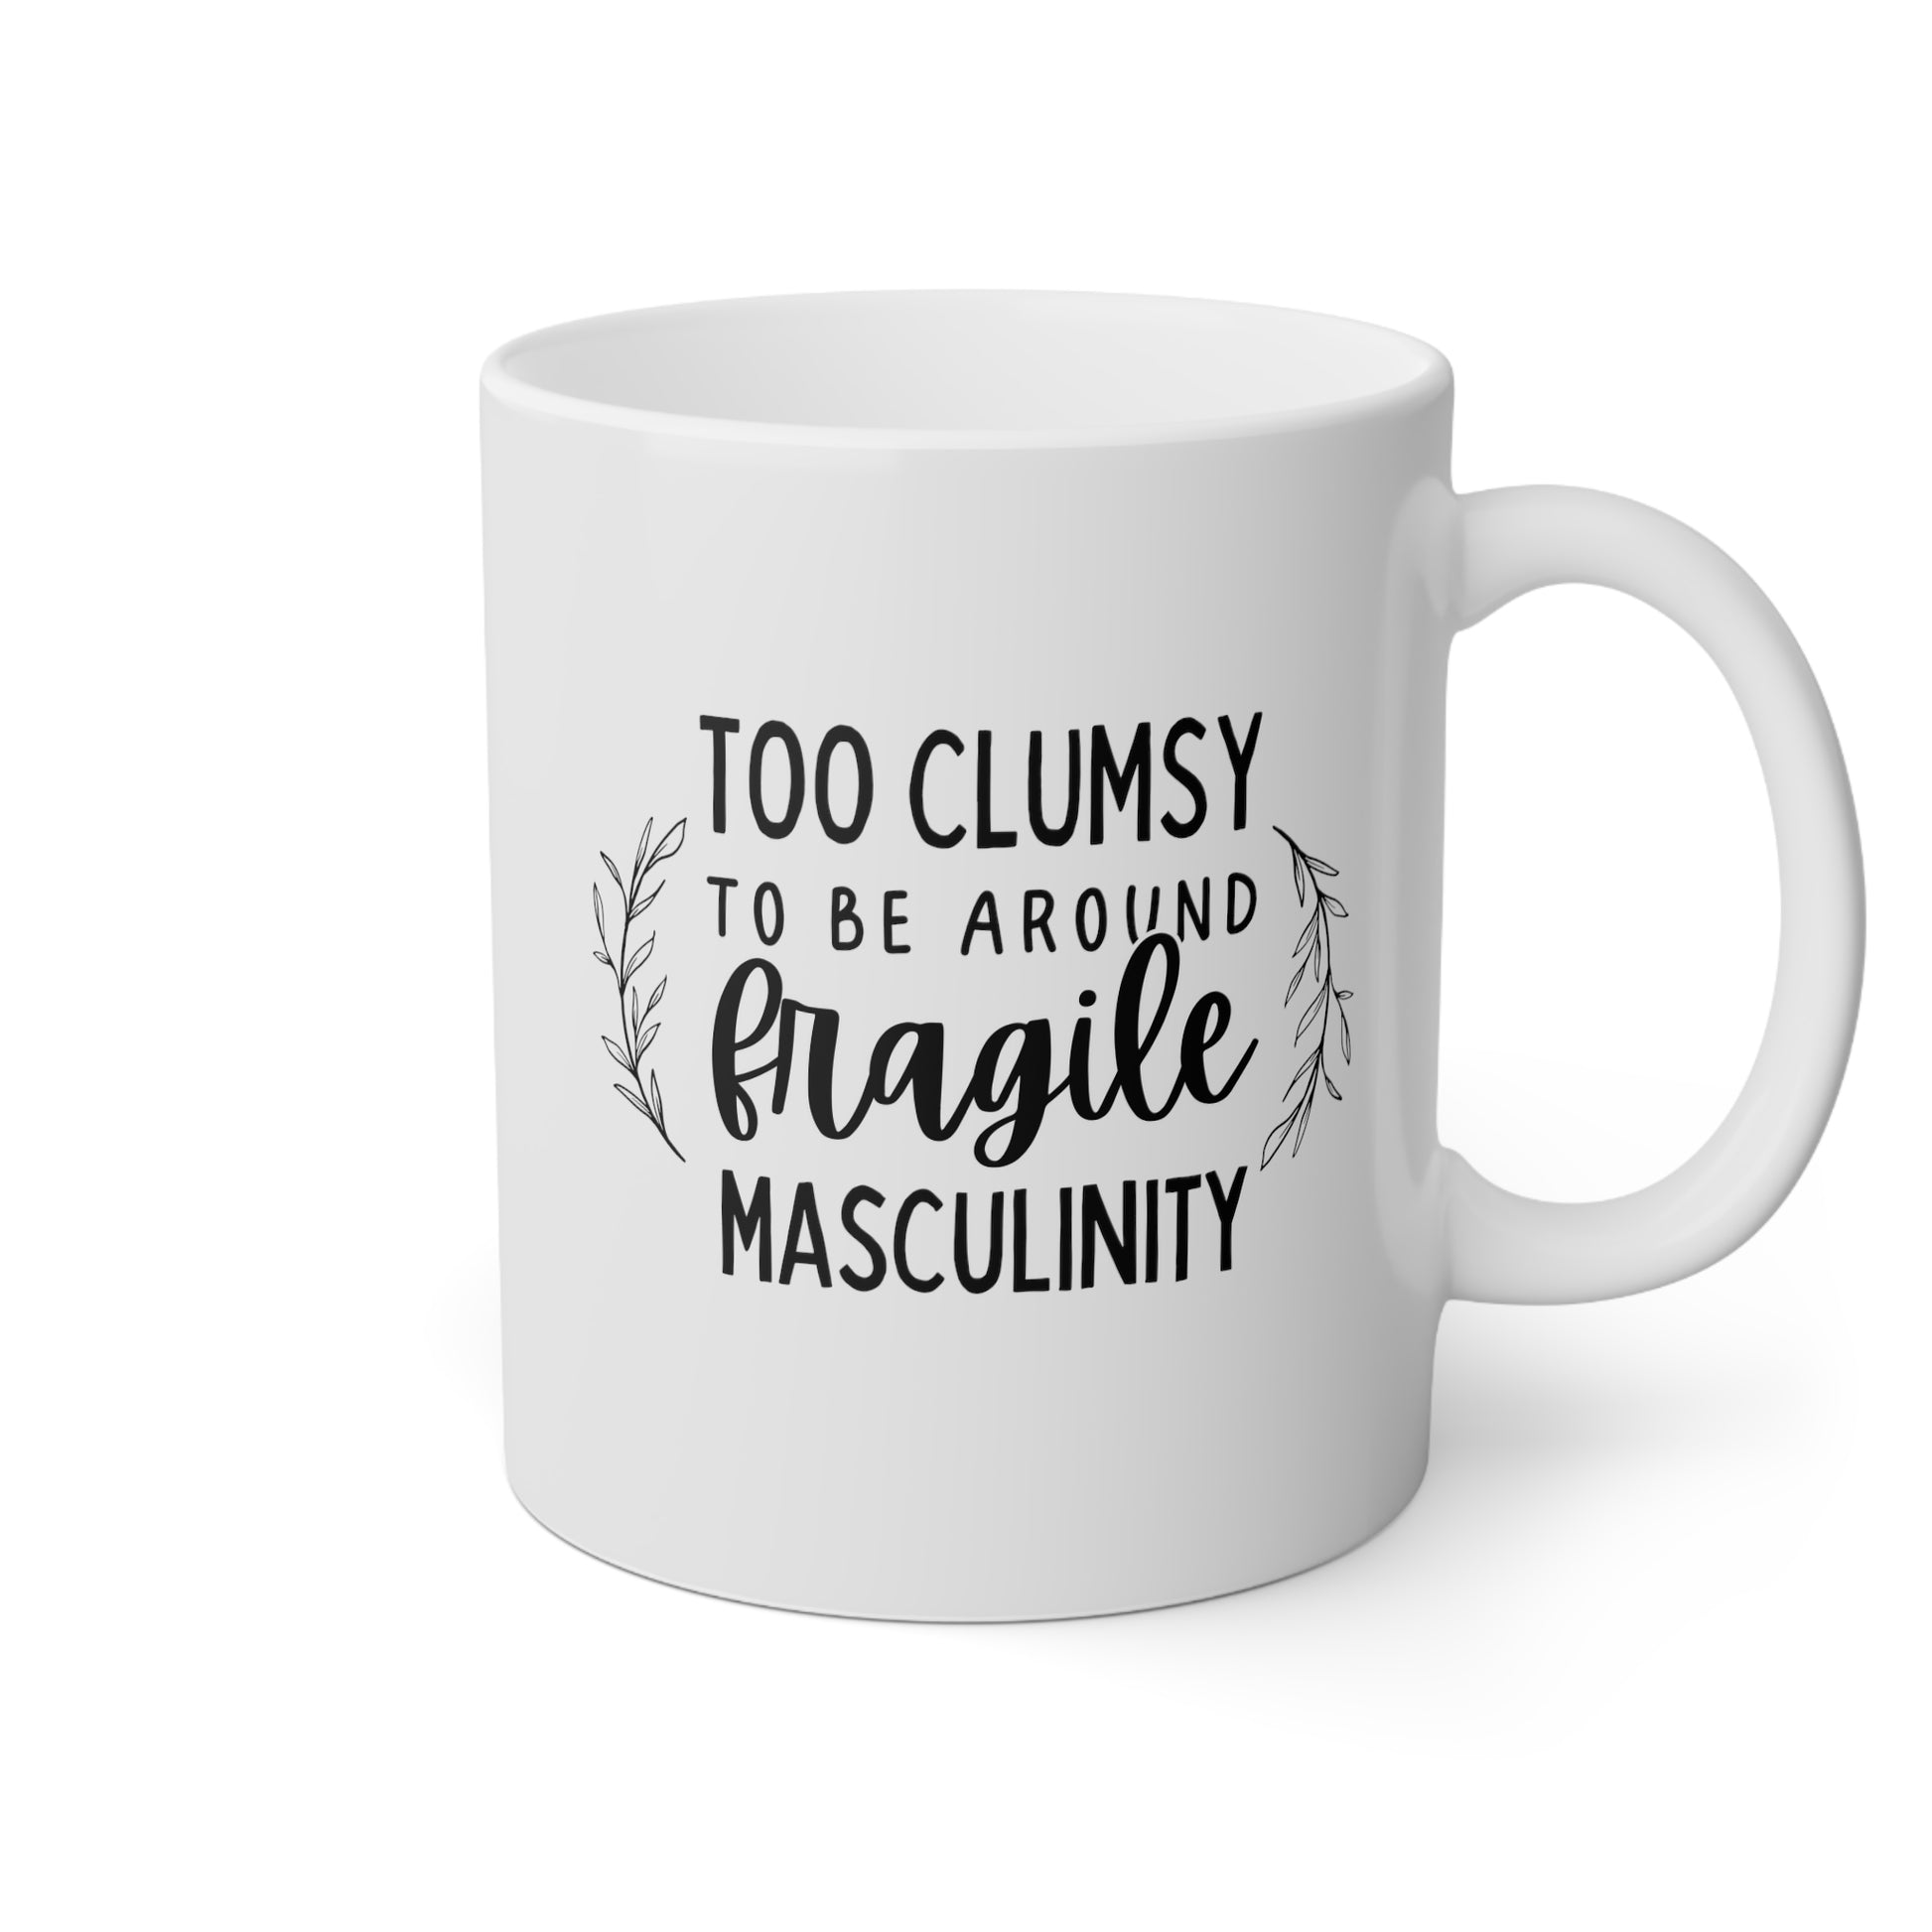 Too Clumsy to be Around Fragile Masculinity 11oz white funny large coffee mug gift for women feminist feminism waveywares wavey wares wavywares wavy wares